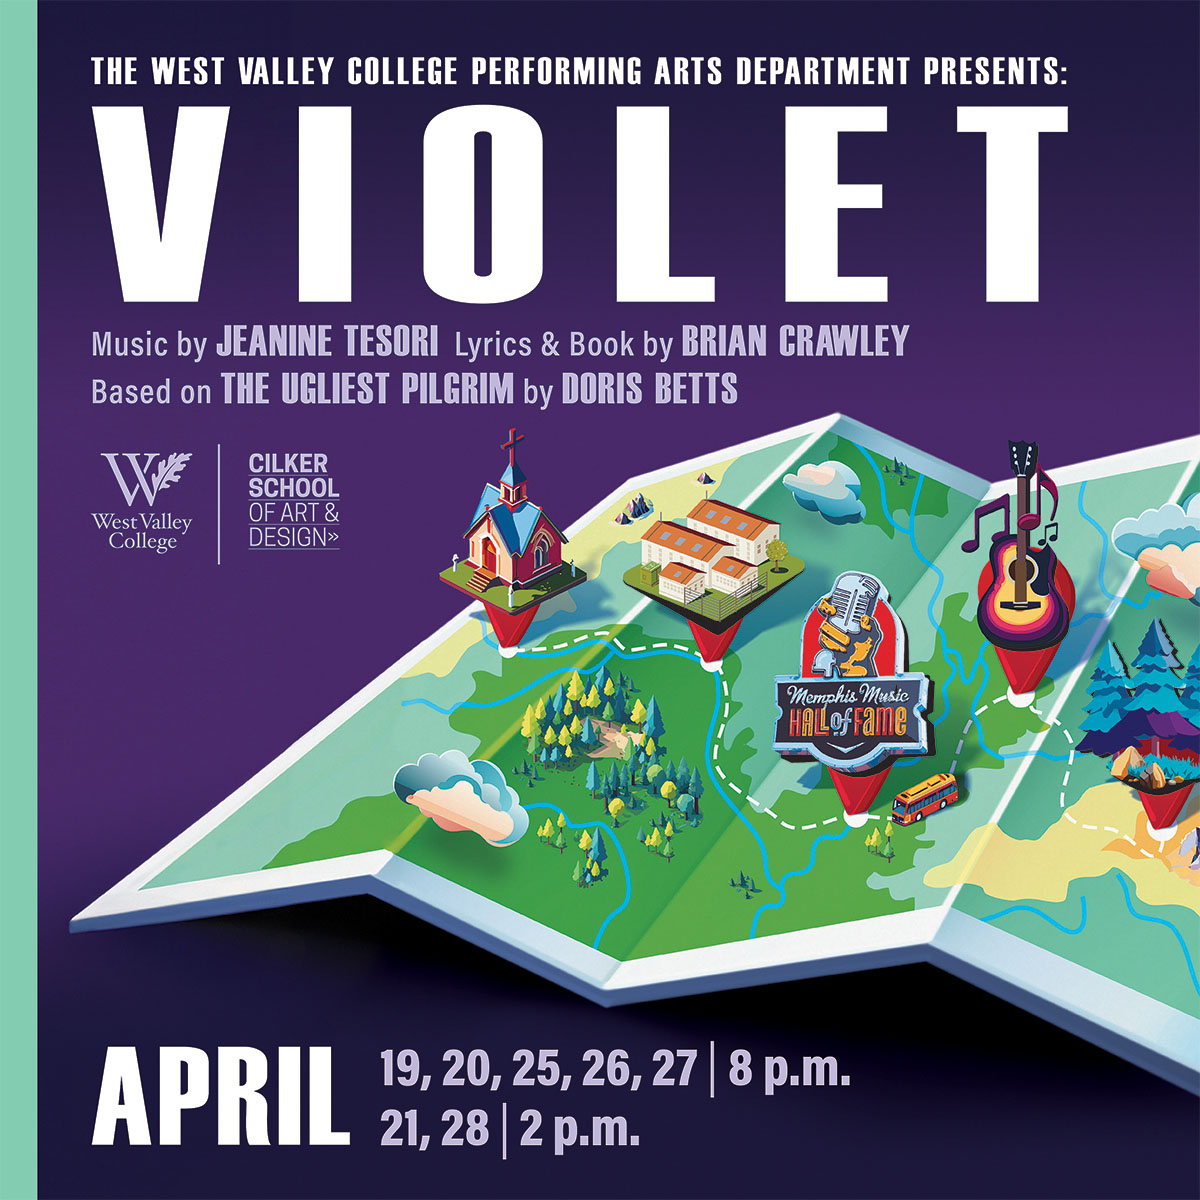 Violet show graphic that names who the music was written by and a map of the locations where this musical presumably takes place along with the dates of the show.